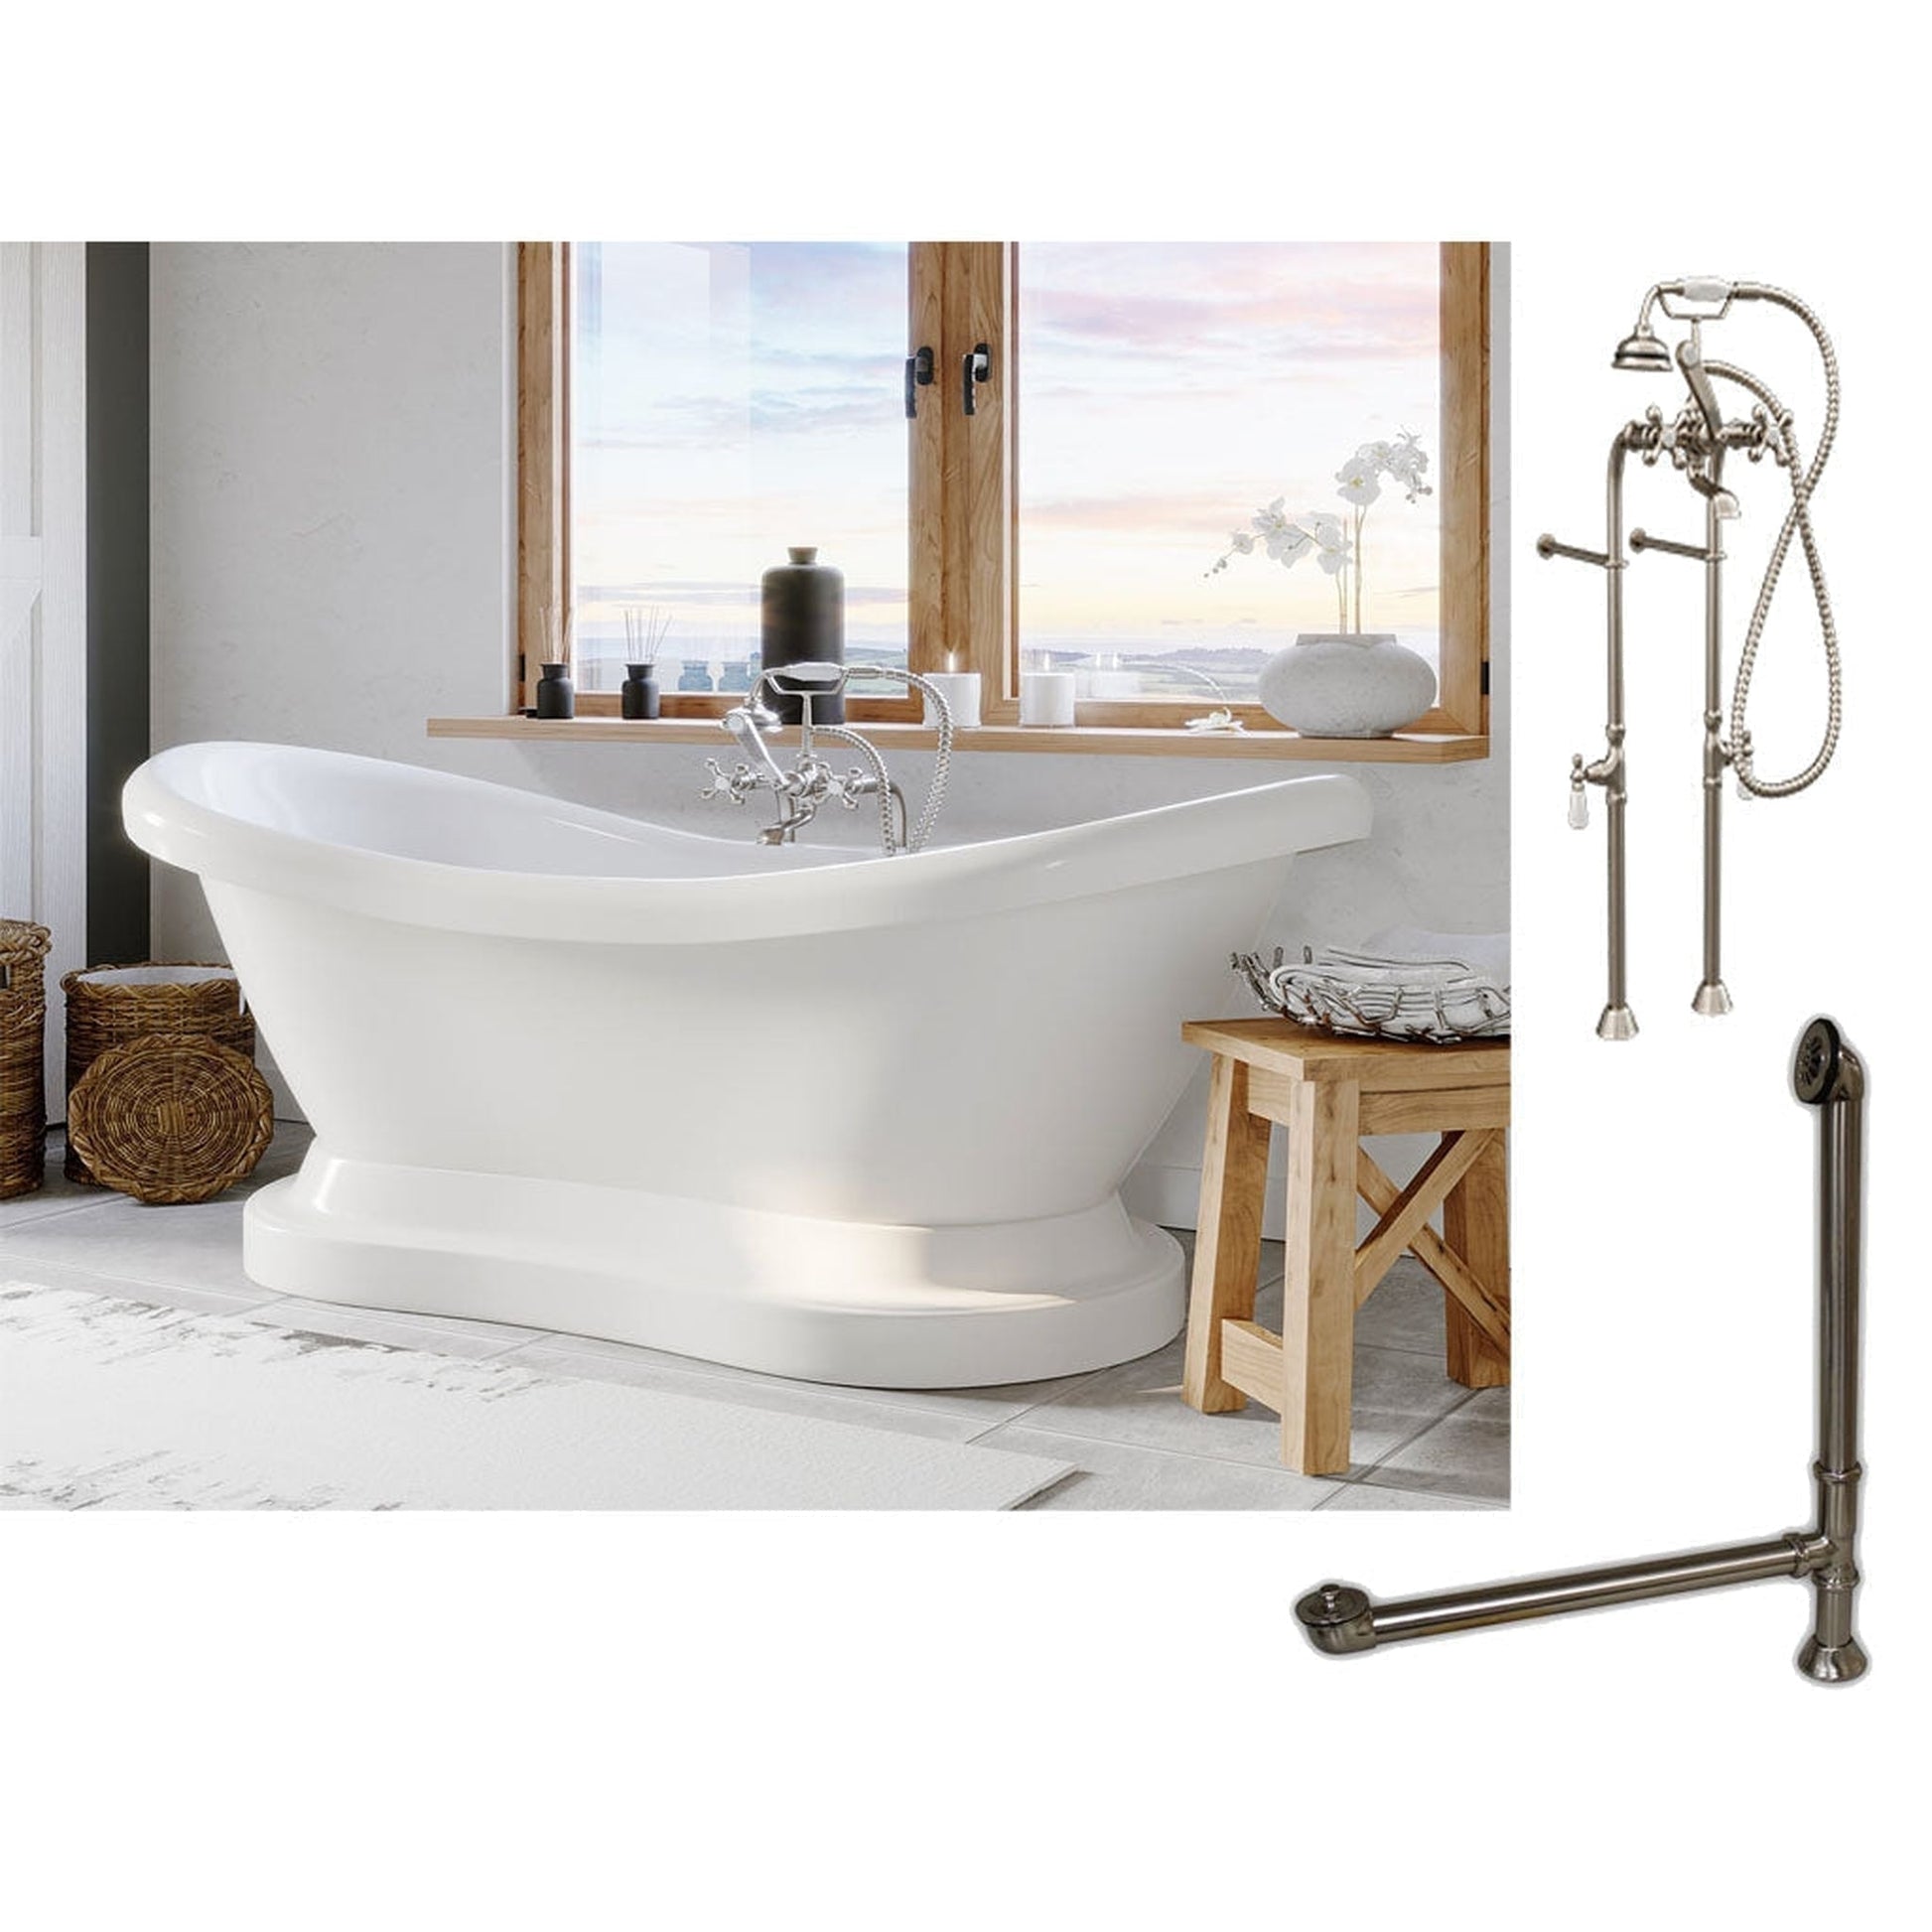 Cambridge Plumbing 69" White Double Slipper Pedestal Acrylic Bathtub With No Deck Holes And Complete Plumbing Package Including Floor Mounted British Telephone Faucet, Drain And Overflow Assembly In Brushed Nickel